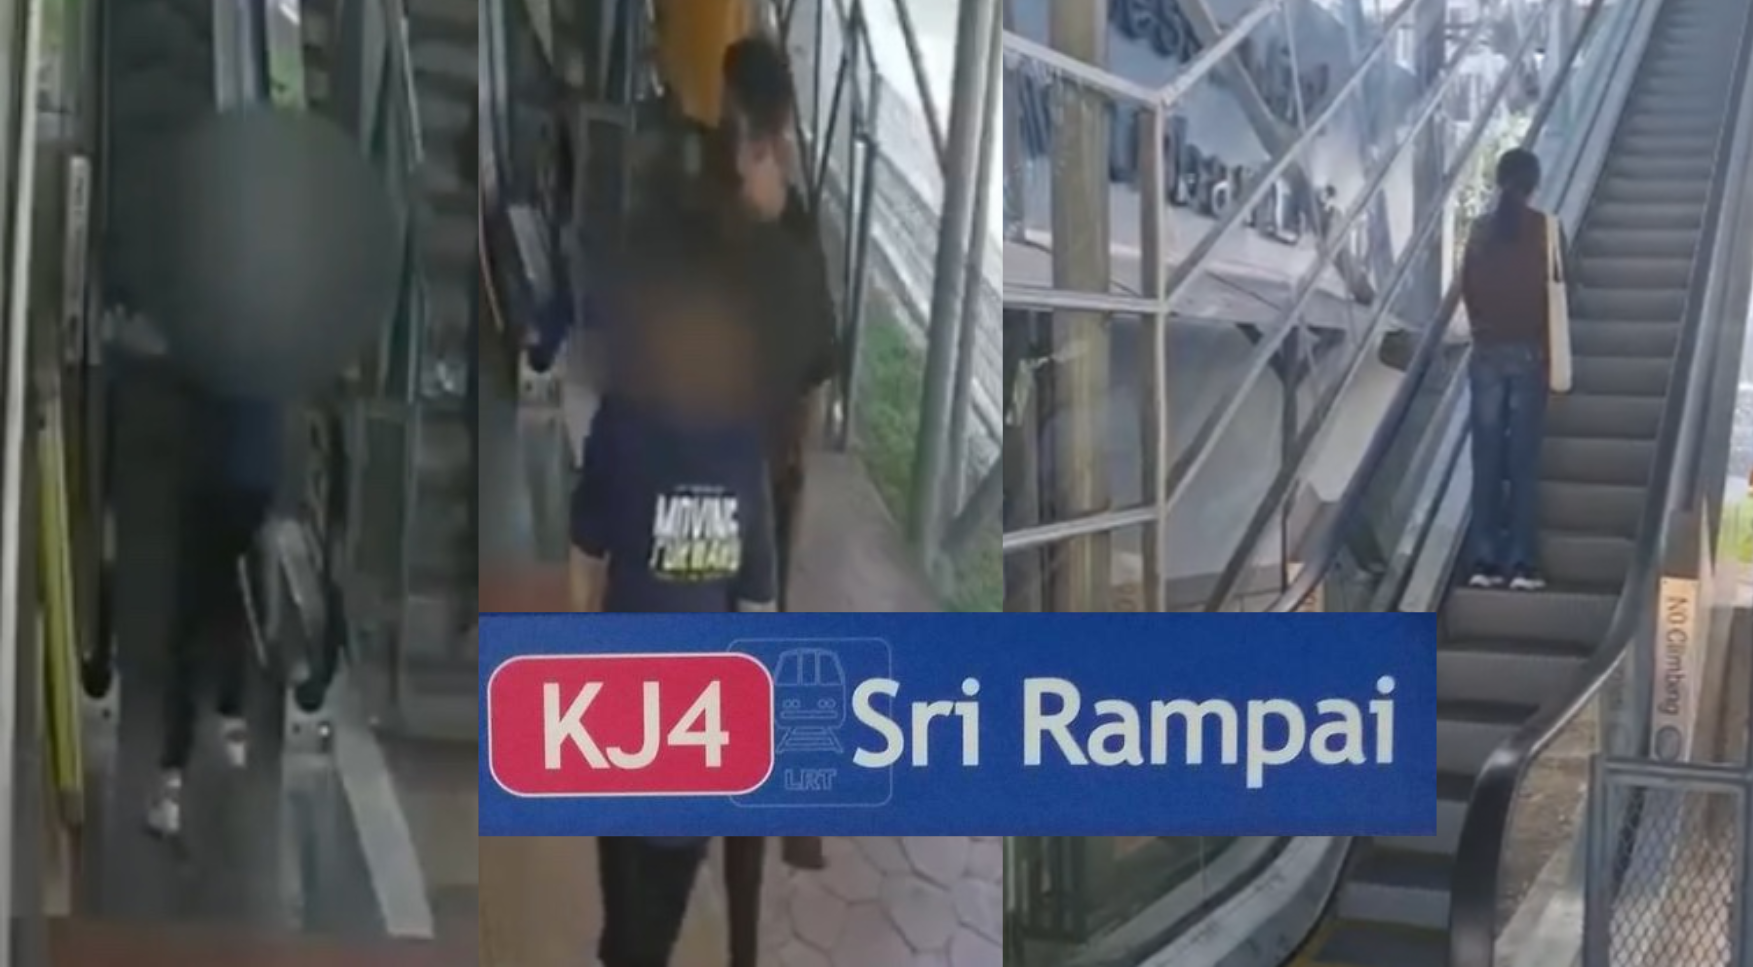 The escalator was only recently fixed and netizens say that DBKL shouldn’t blur the face of the teenager to teach him a lesson. 